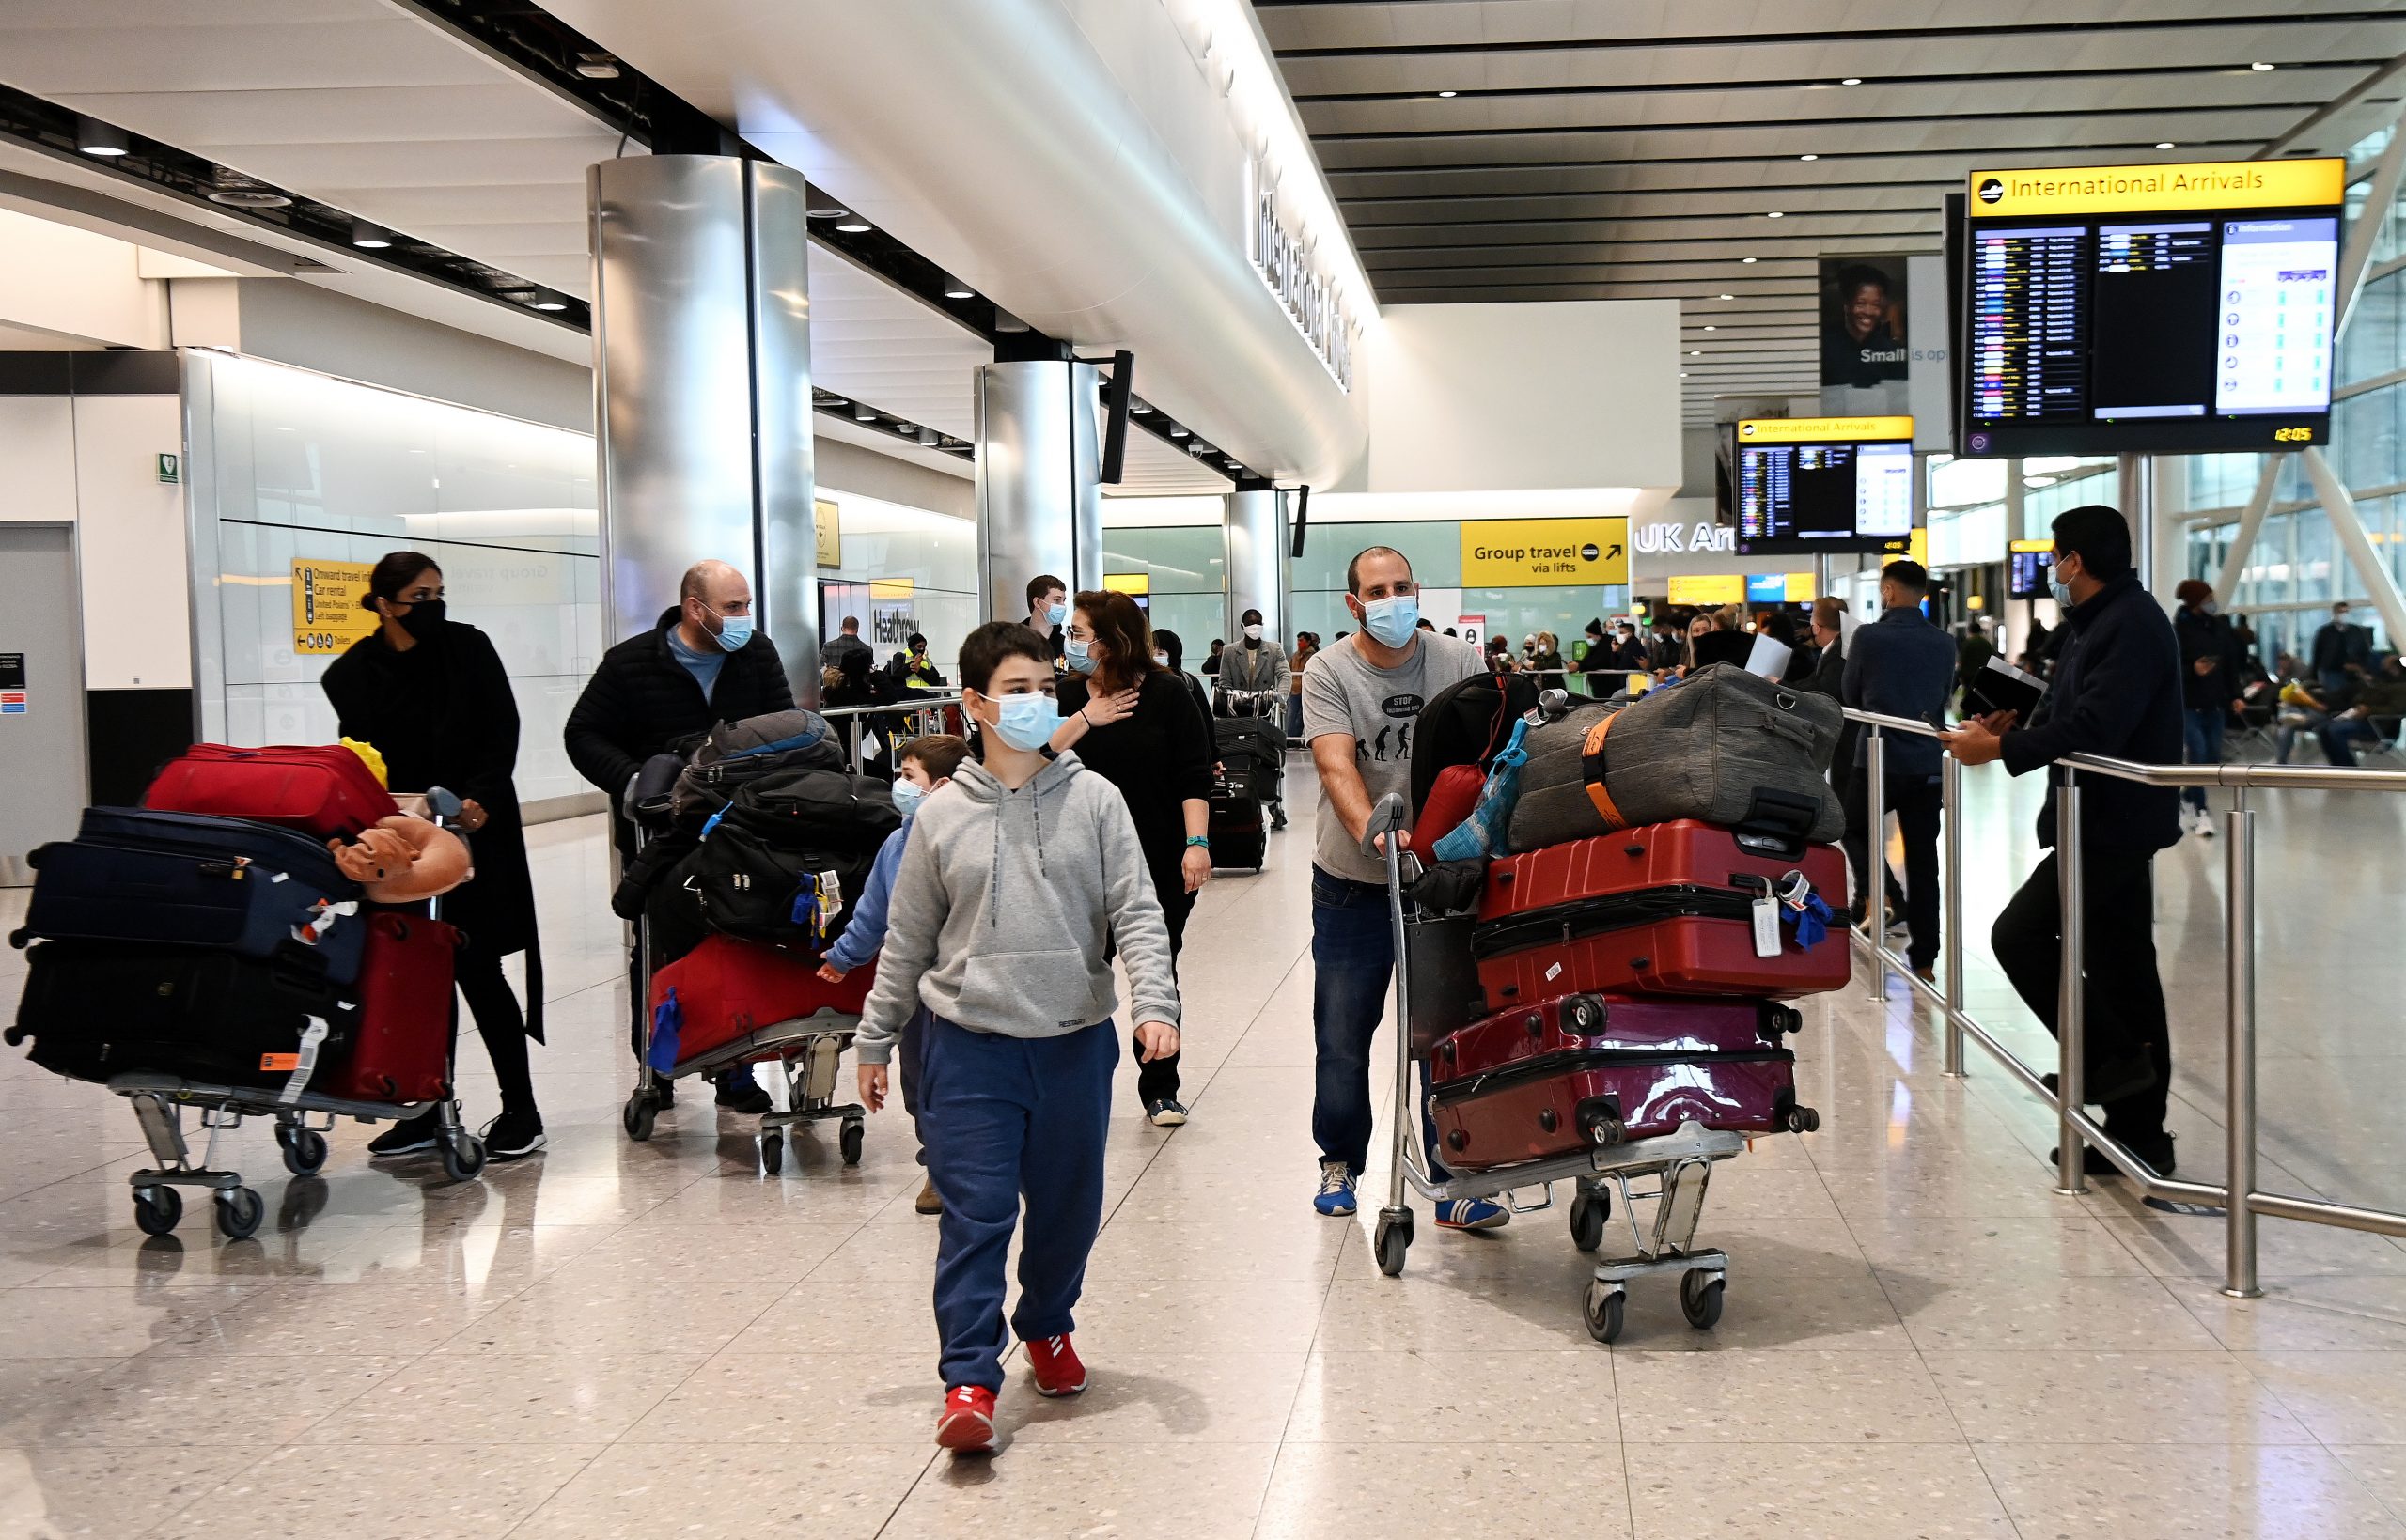 epa08989067 Travellers arrive at Heathrow Airport in London, Britain, 05 February 2021. The UK government is set to implement stricter measures for travellers arriving at Heathrow from Monday 15 February 2021. People arriving into Heathrow from so called 'at risk' countries will have to isolate in designated government hotels for up to ten days at their own cost.  EPA/ANDY RAIN